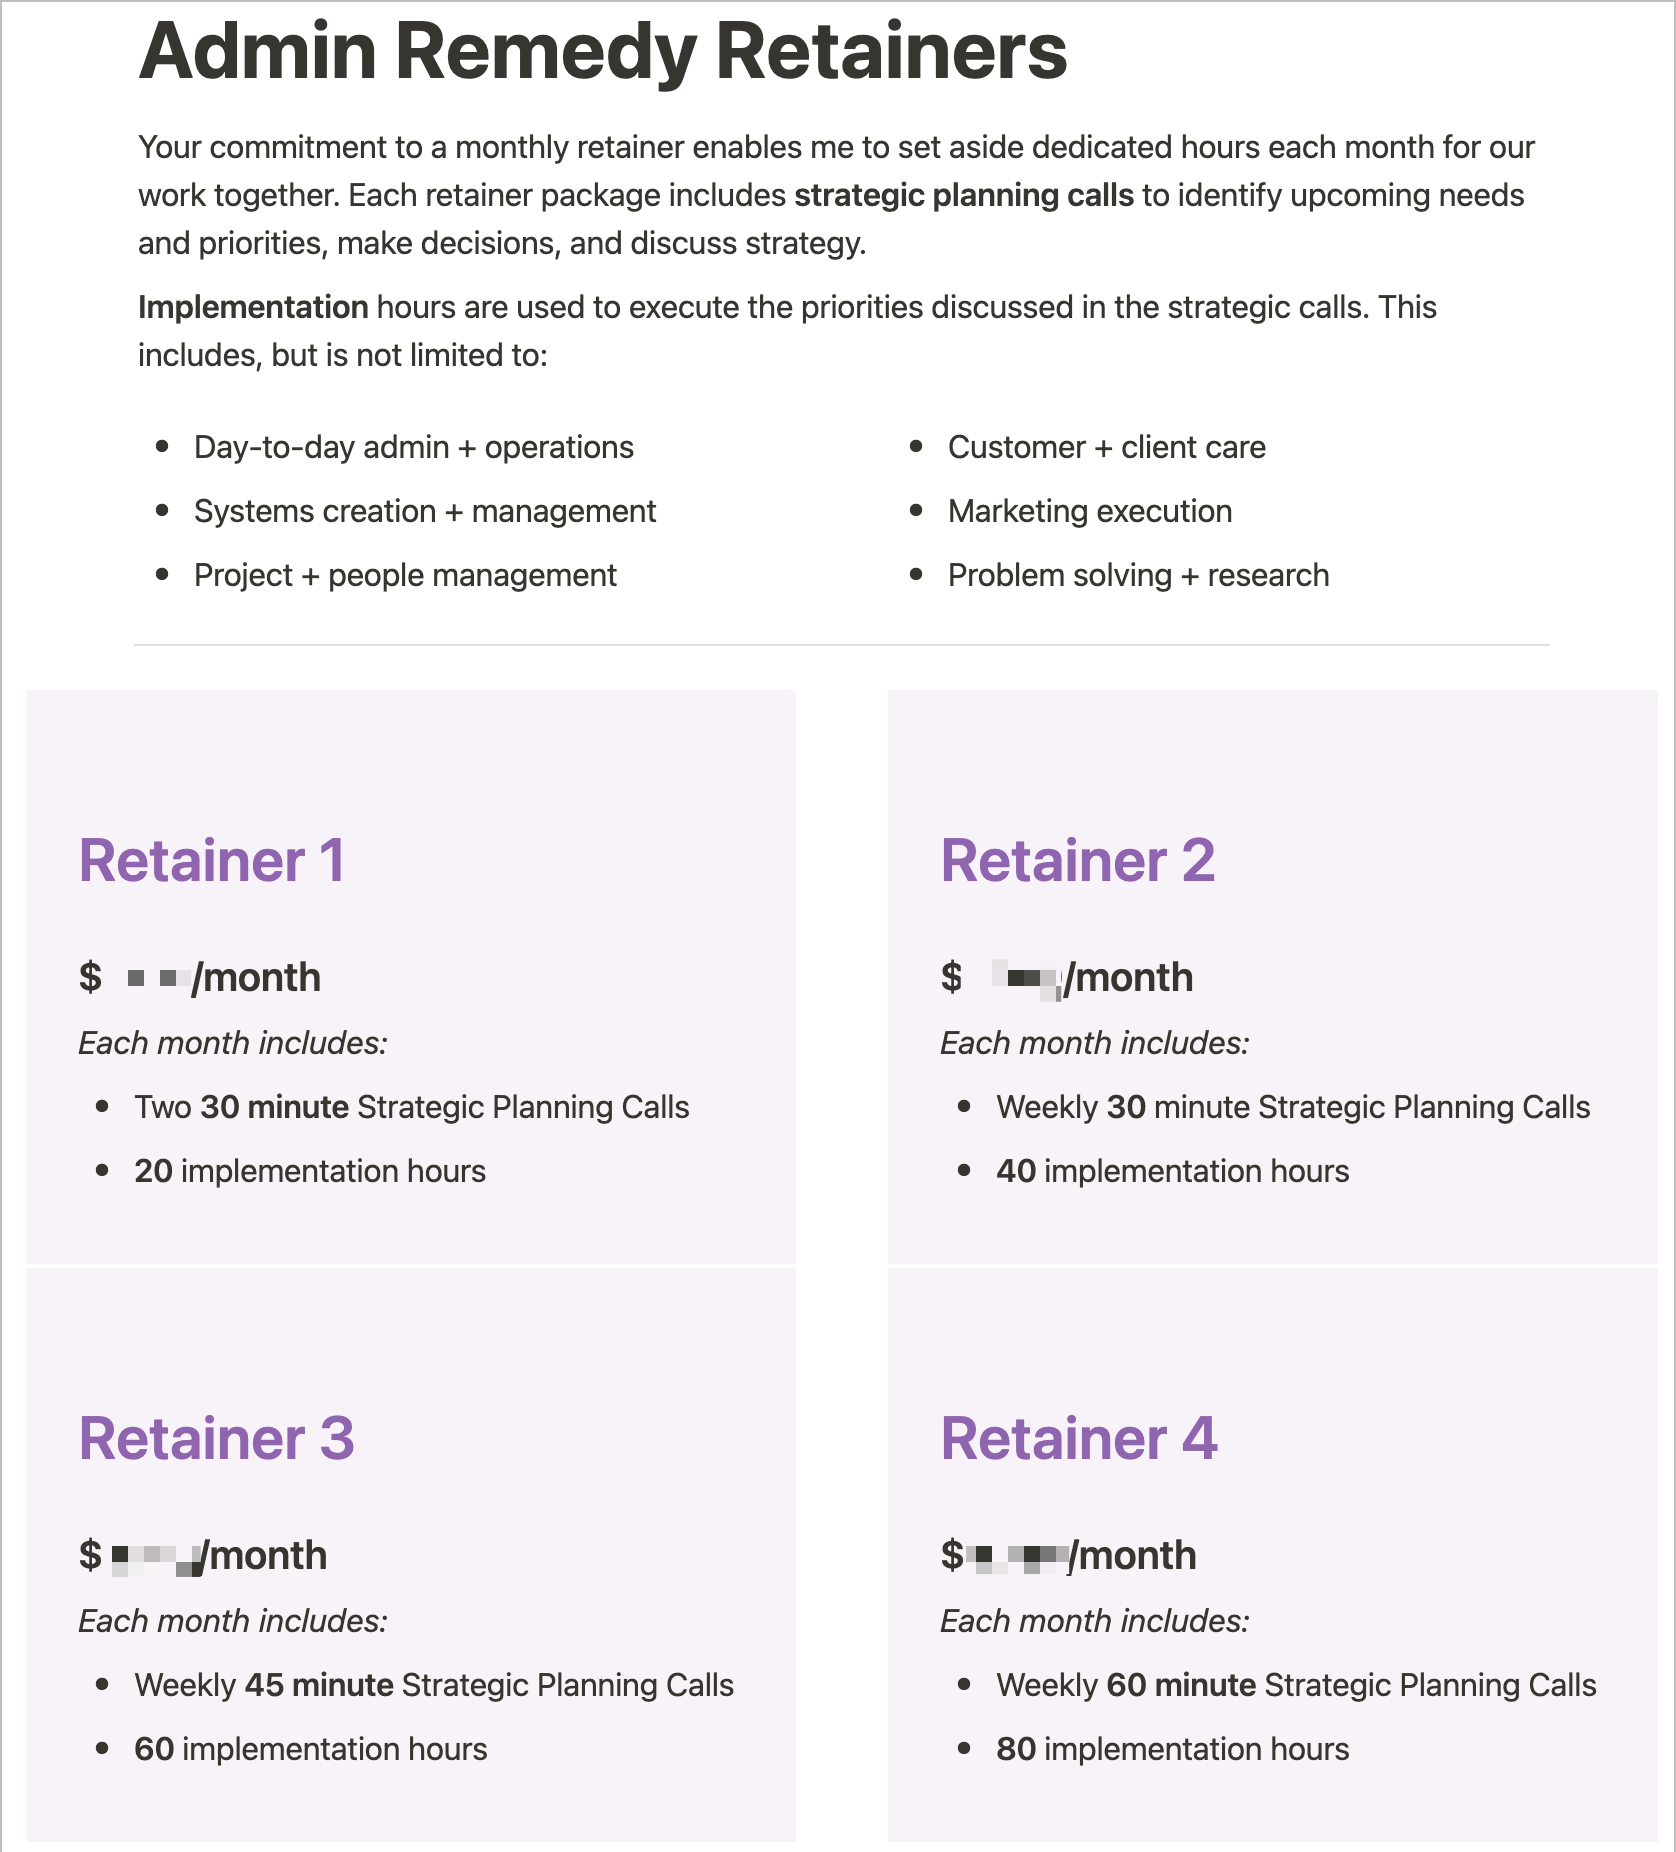 A Notion page showing different retainer package options for clients.